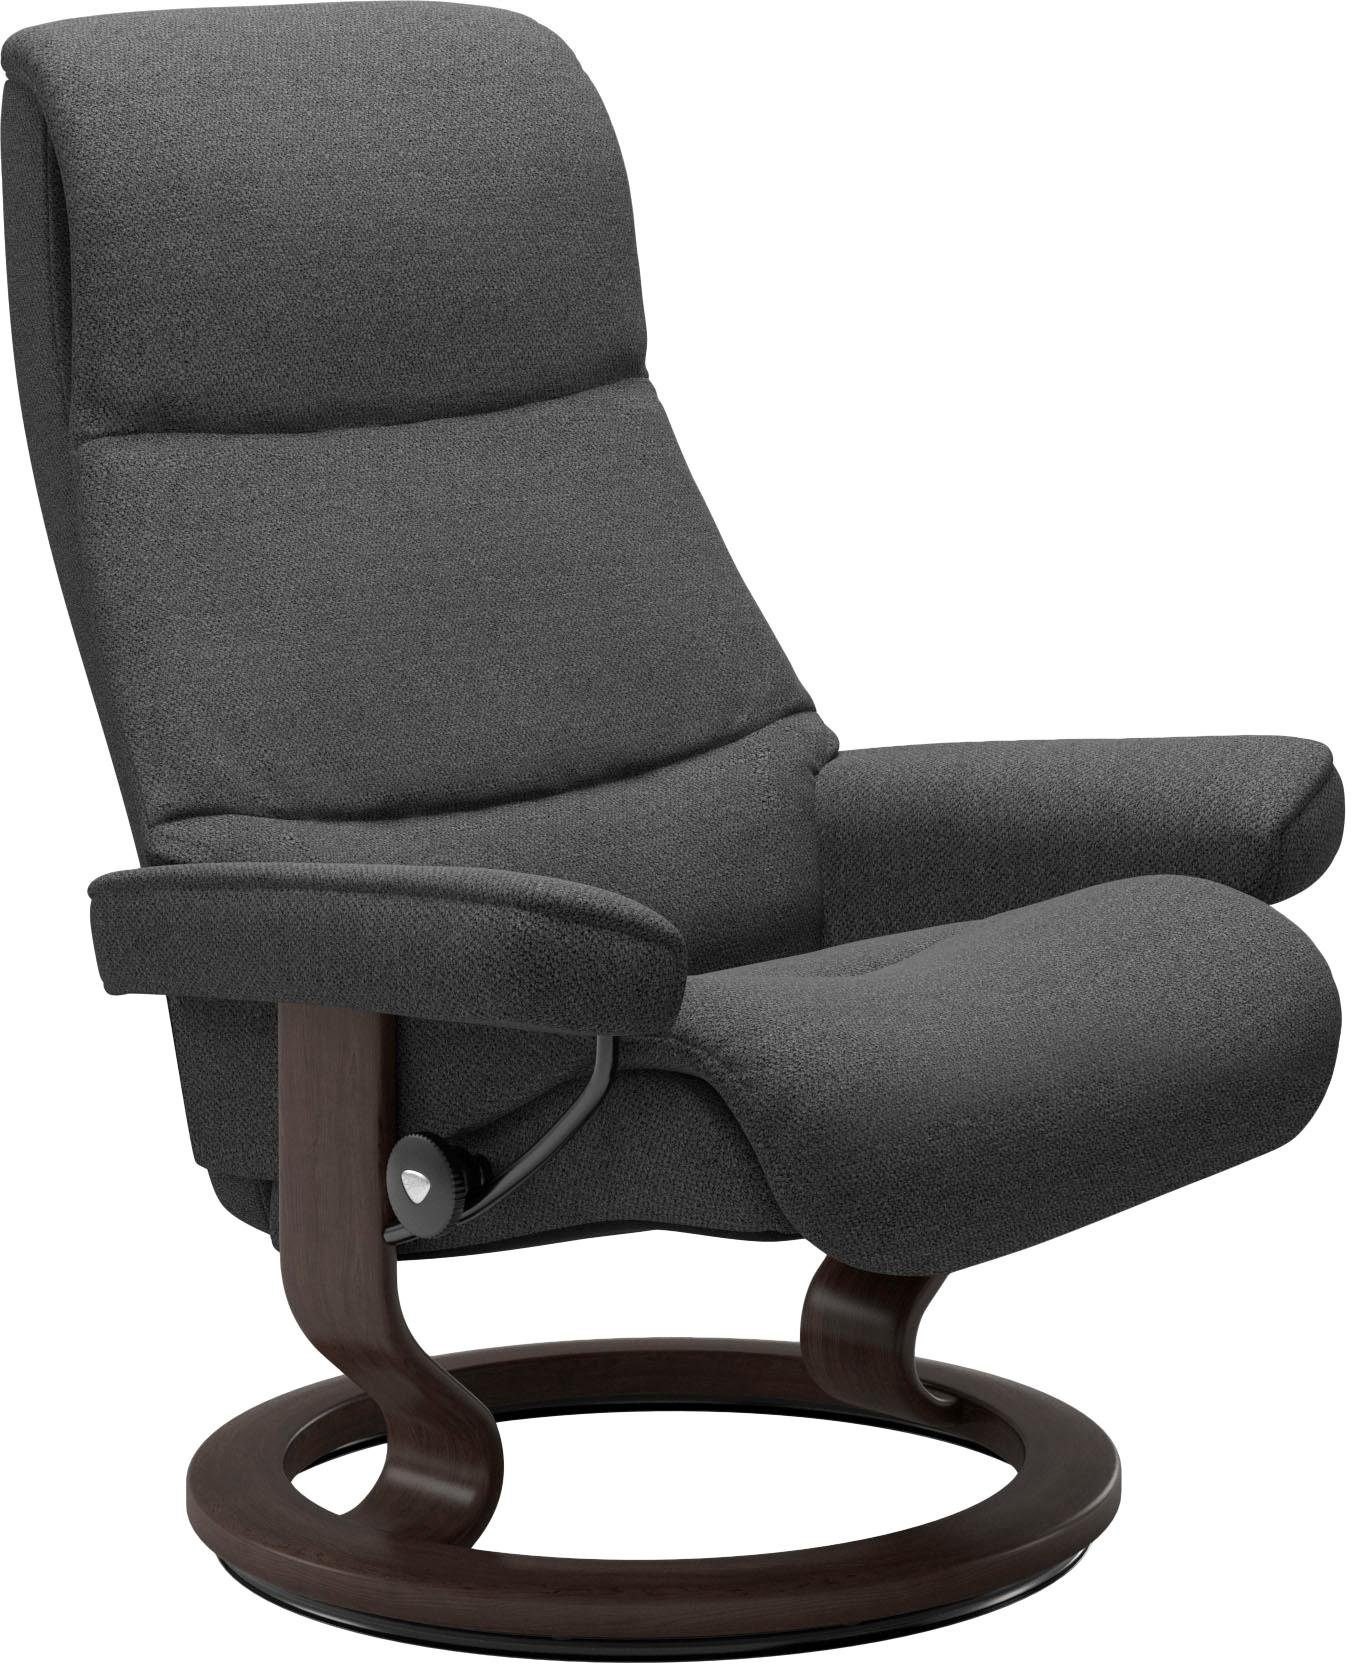 Stressless® Relaxsessel View, mit Classic Base, Größe S,Gestell Wenge | Funktionssessel